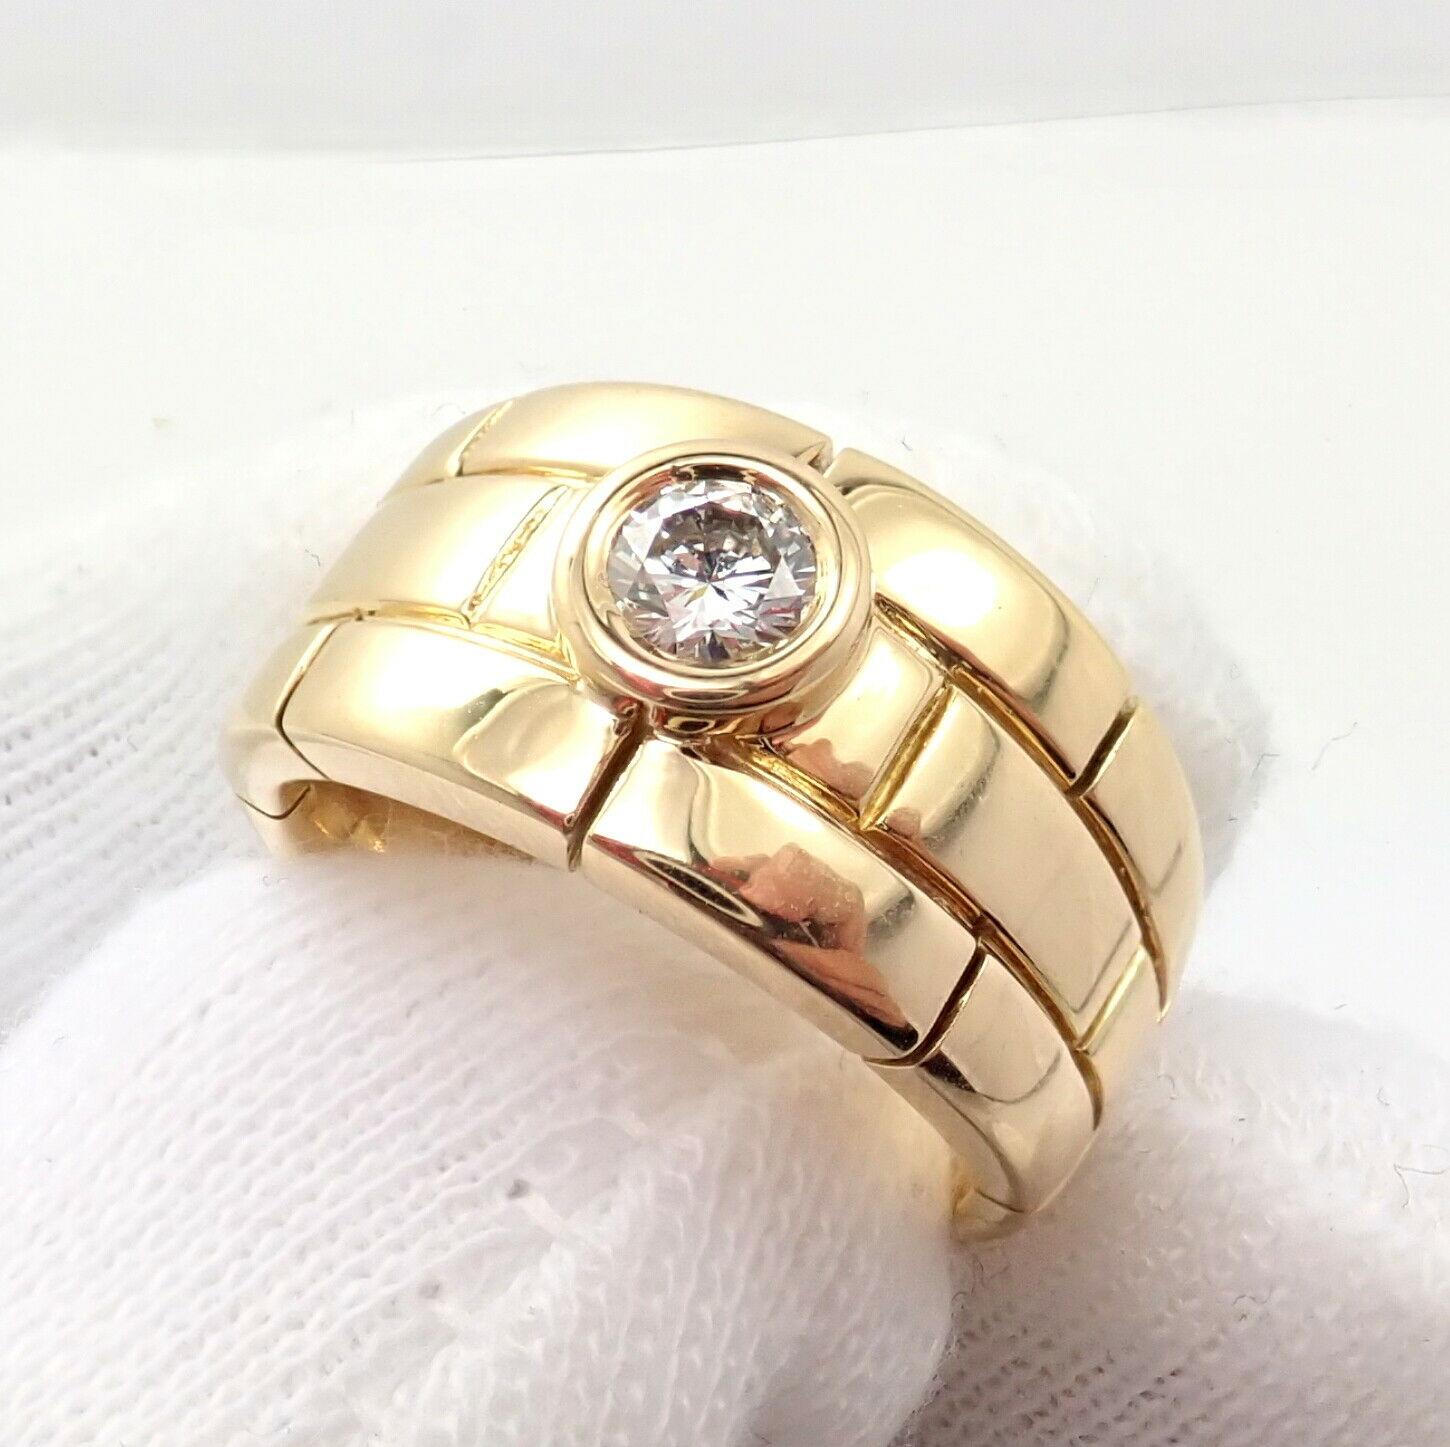 Brilliant Cut Cartier Maillon Panthere Solitare Diamond Gold Band Ring